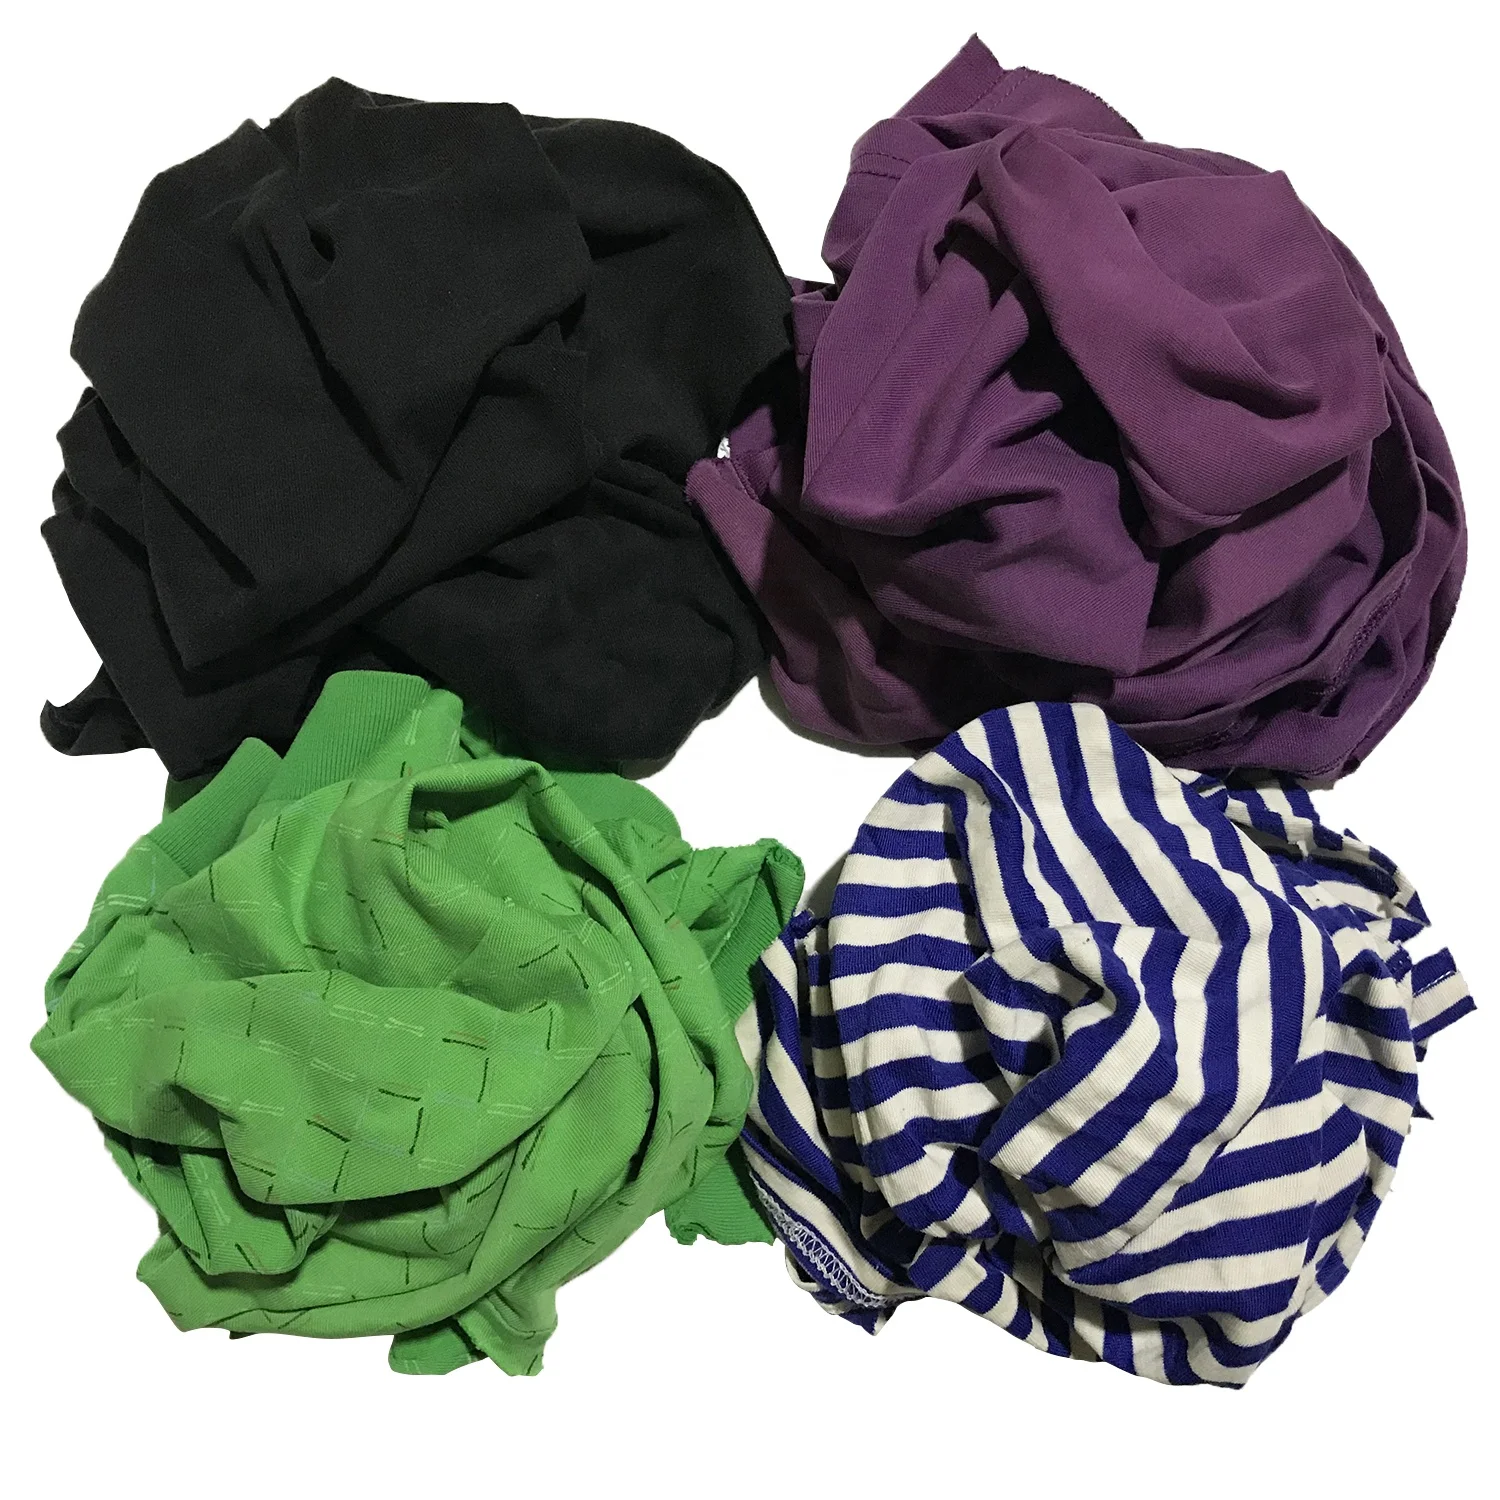 
10KG Bag of Disposable industrial cotton wiping rags 